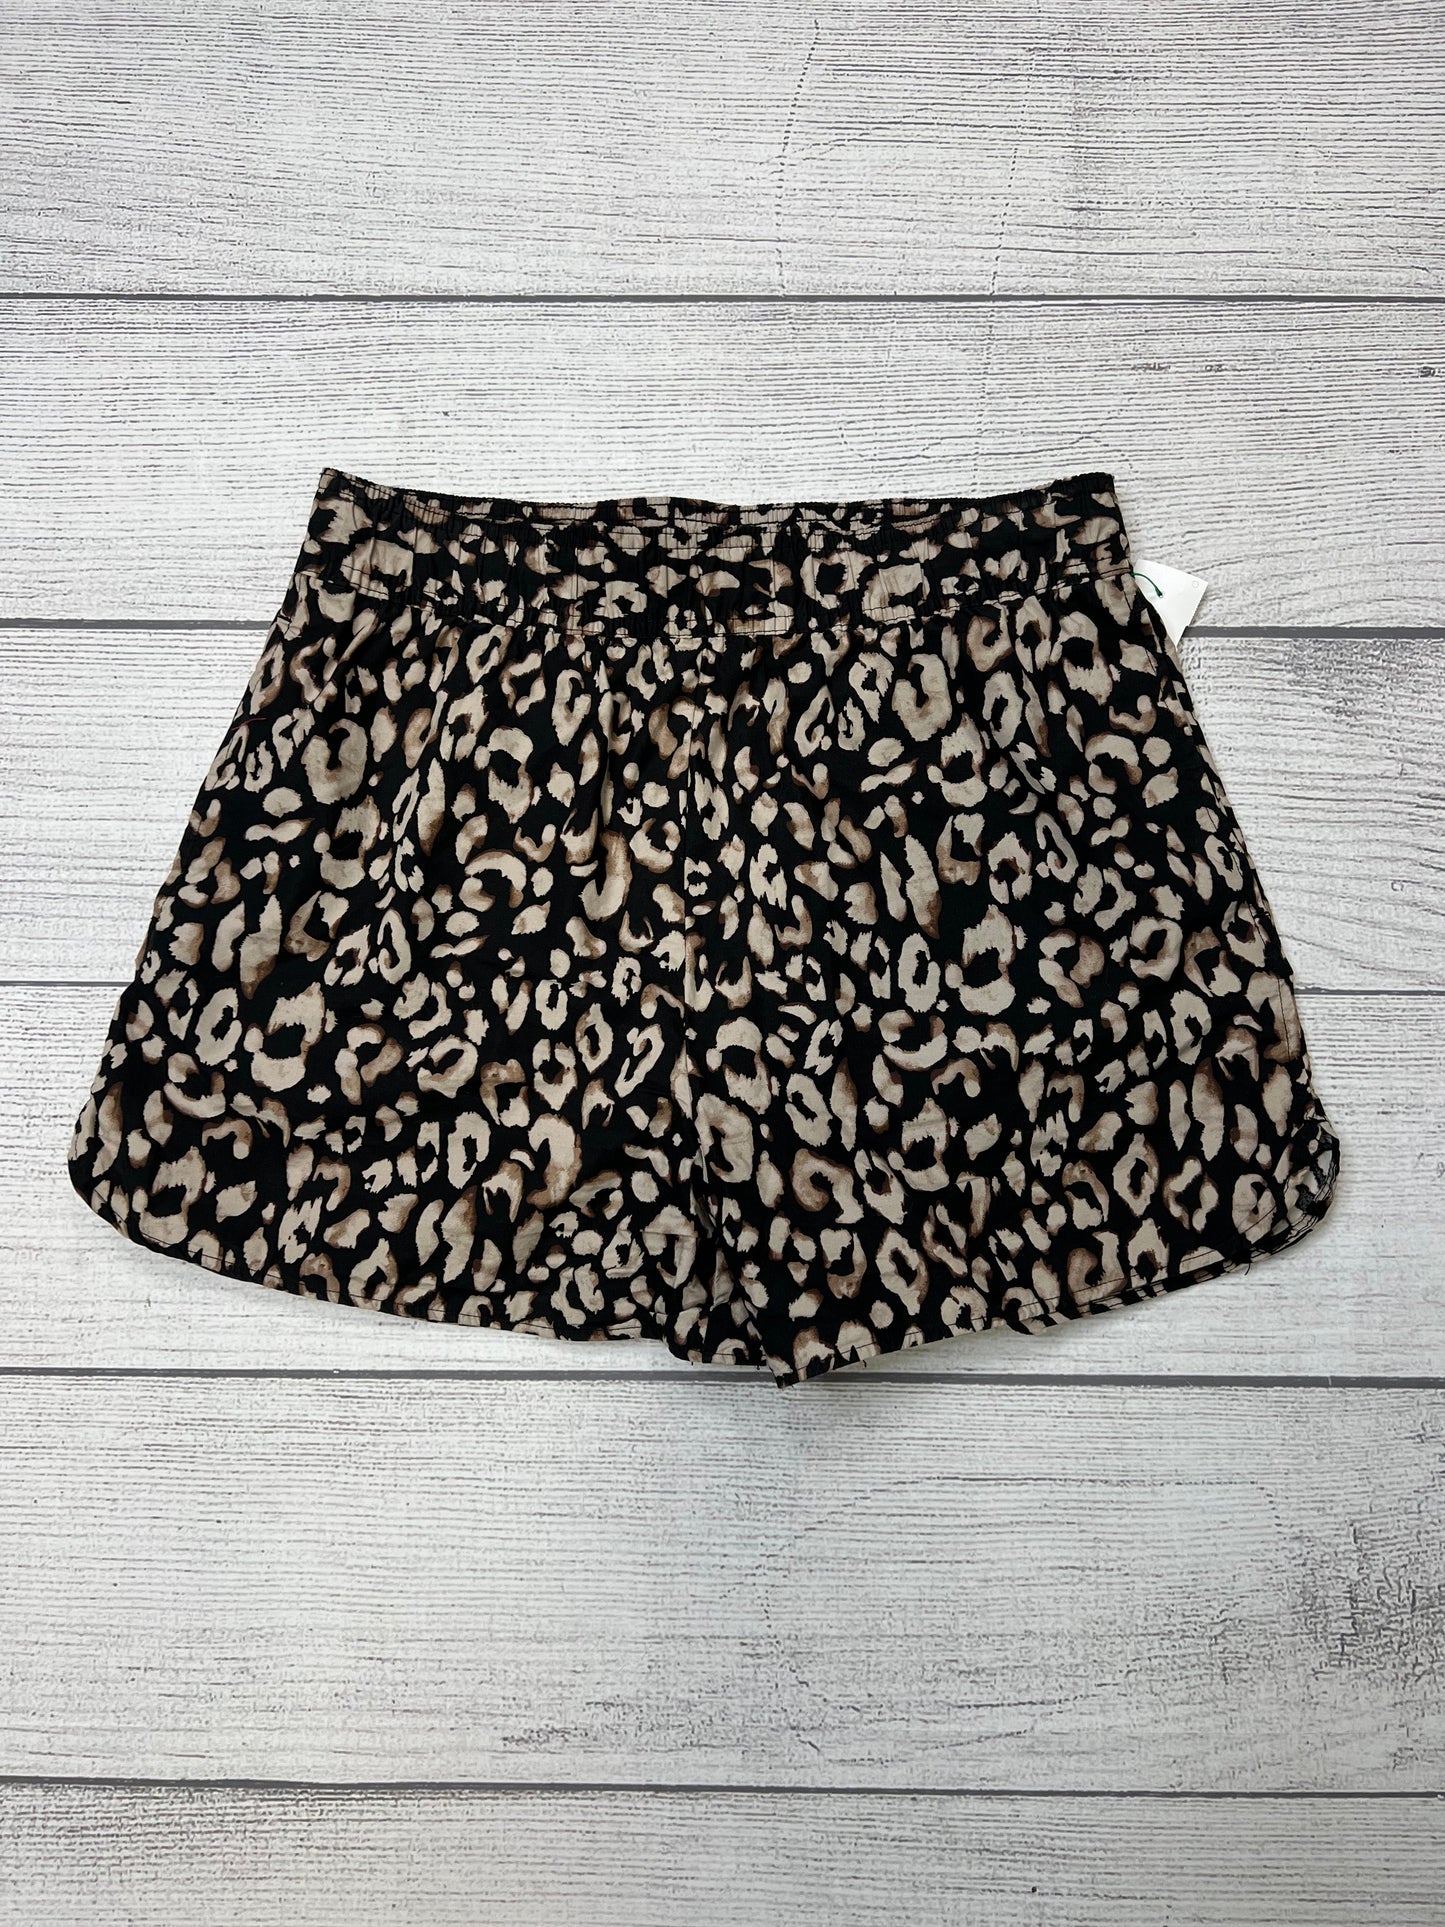 Shorts By H&m  Size: S